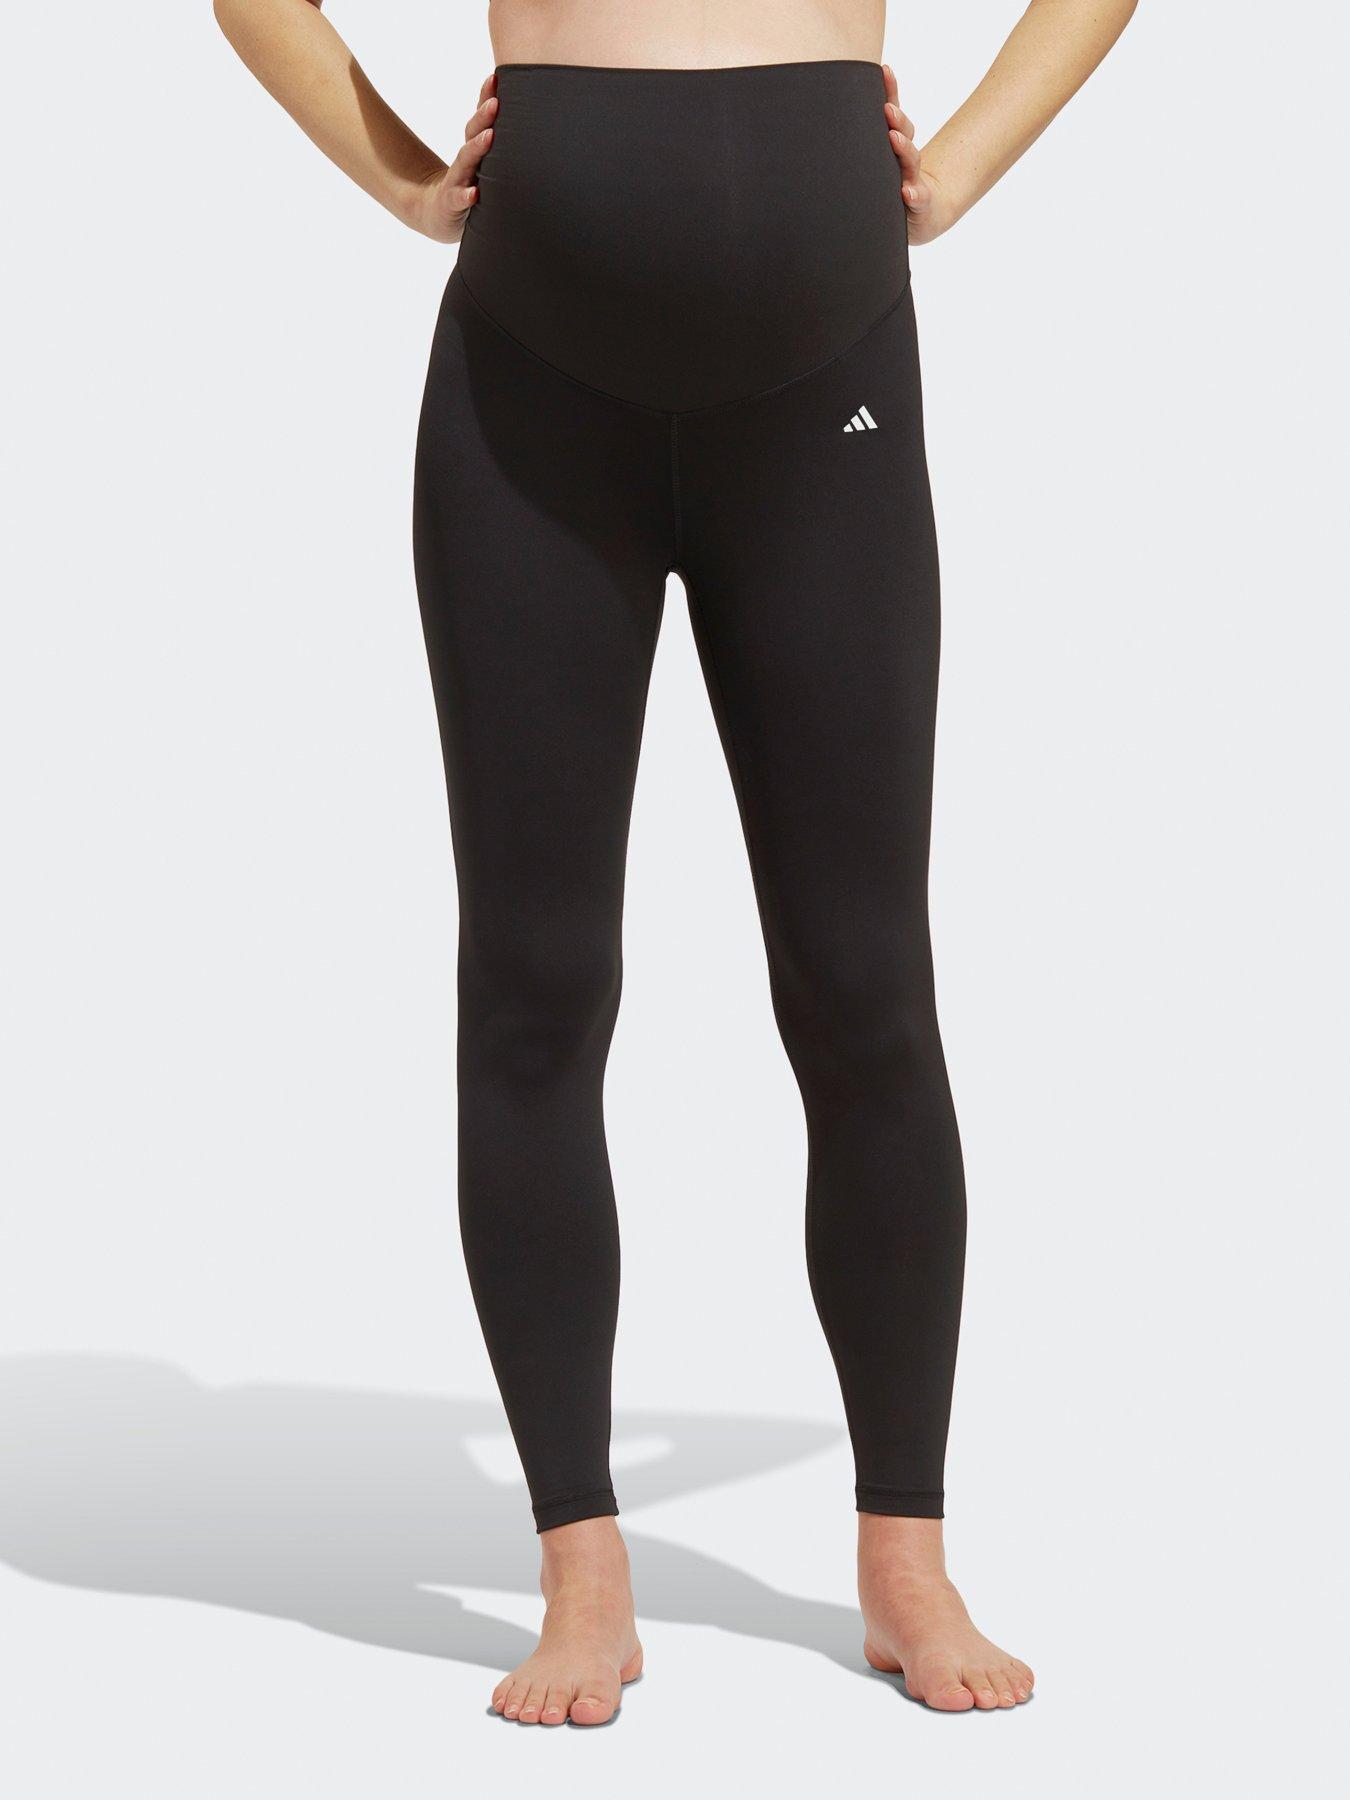 Maternity 7/8 Leggings. Pregnancy Workout Tights - Running Bare